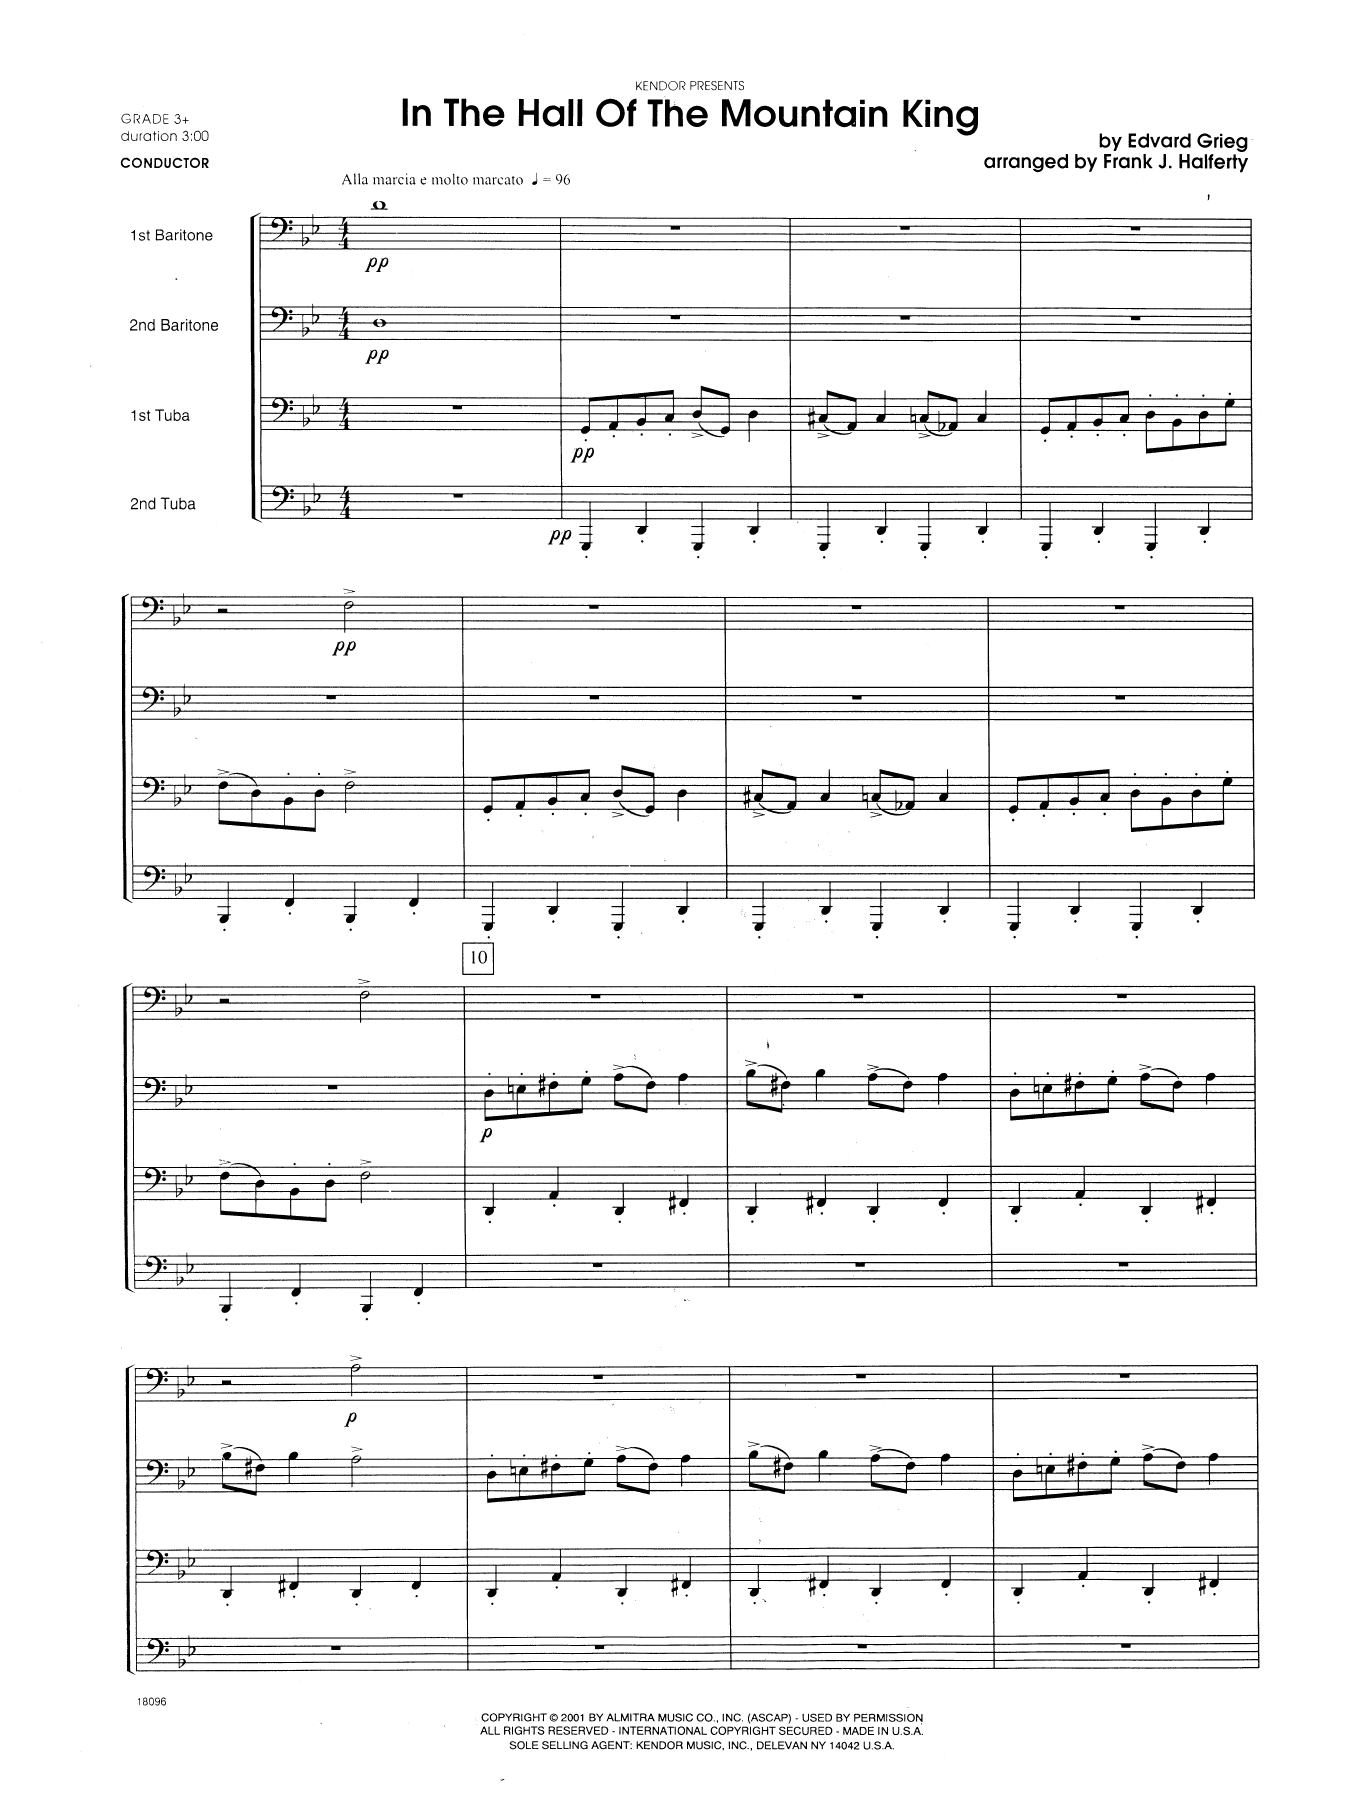 Download Halferty In the Hall of the Mountain King - Full Sheet Music